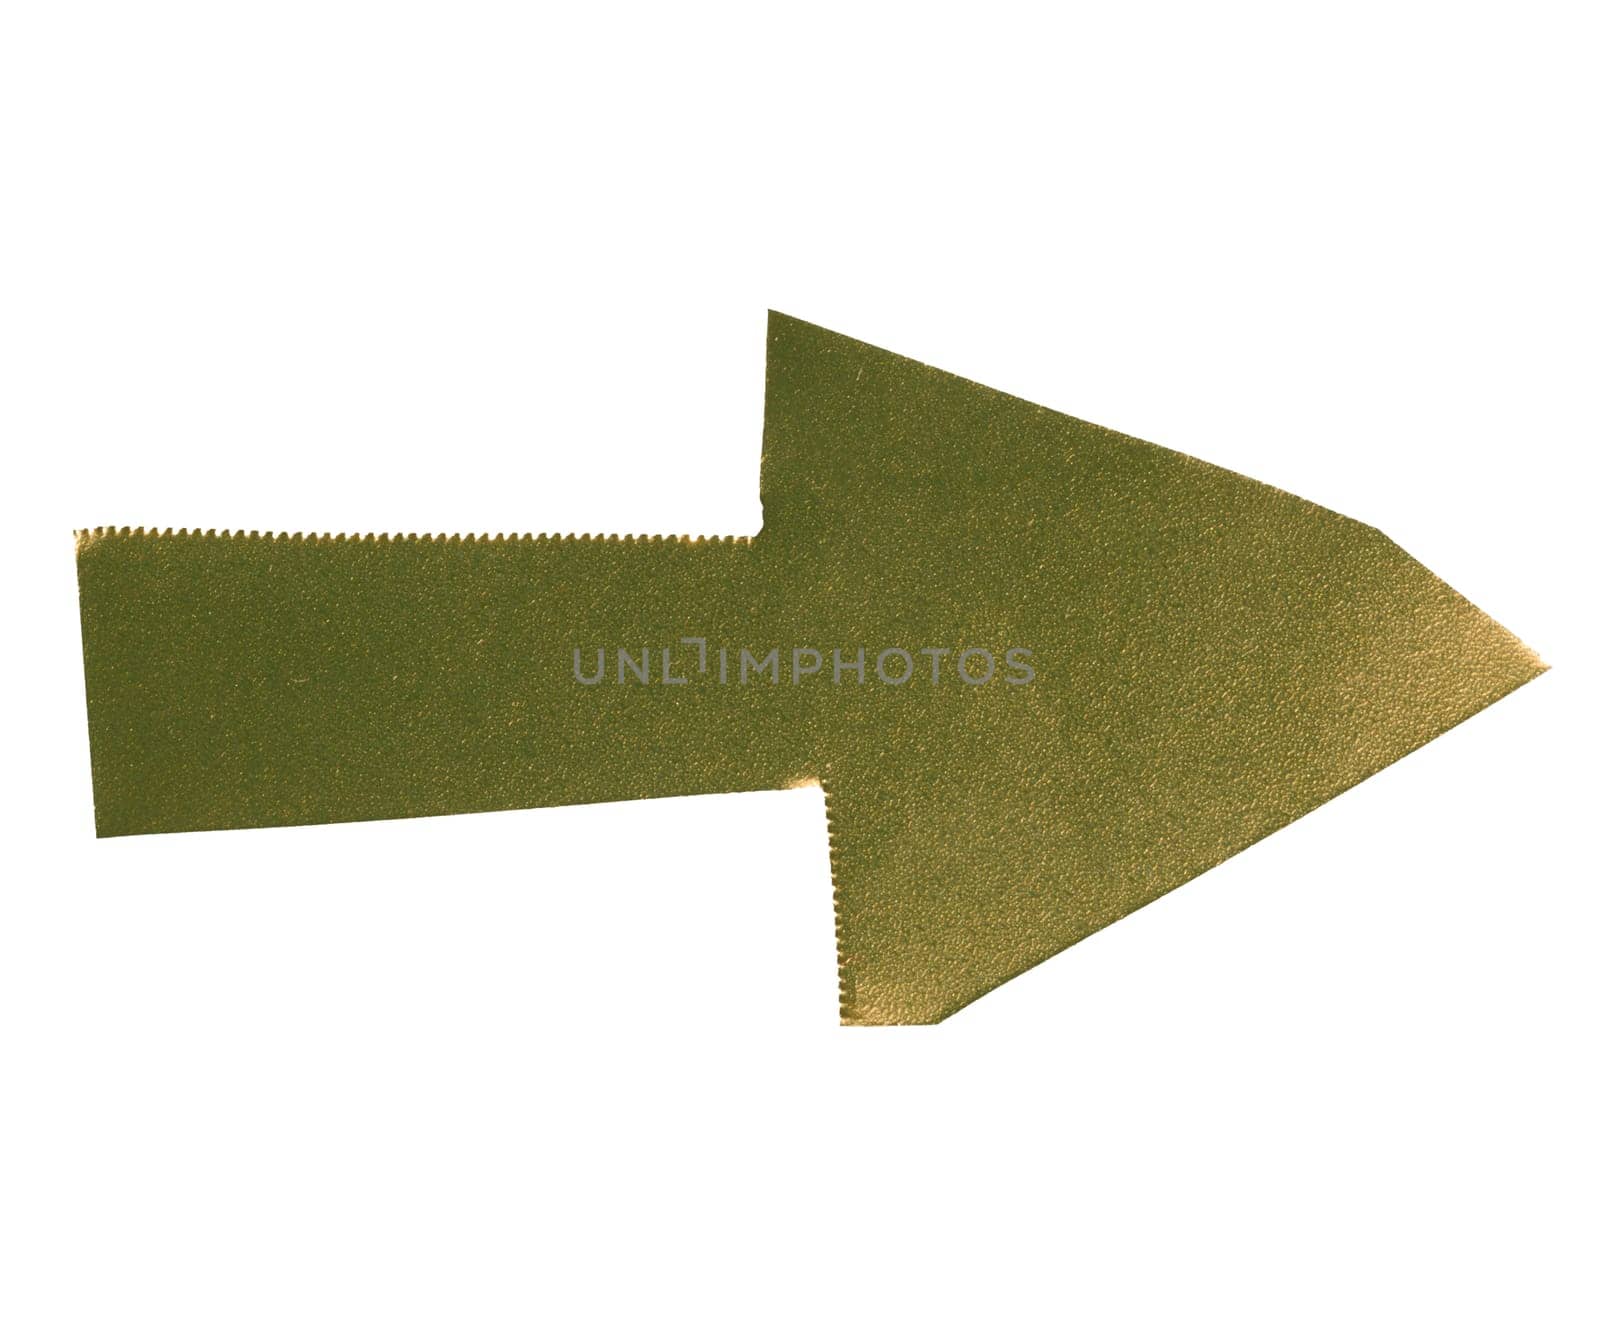 Arrow made of yellow shiny cardboard on isolated background